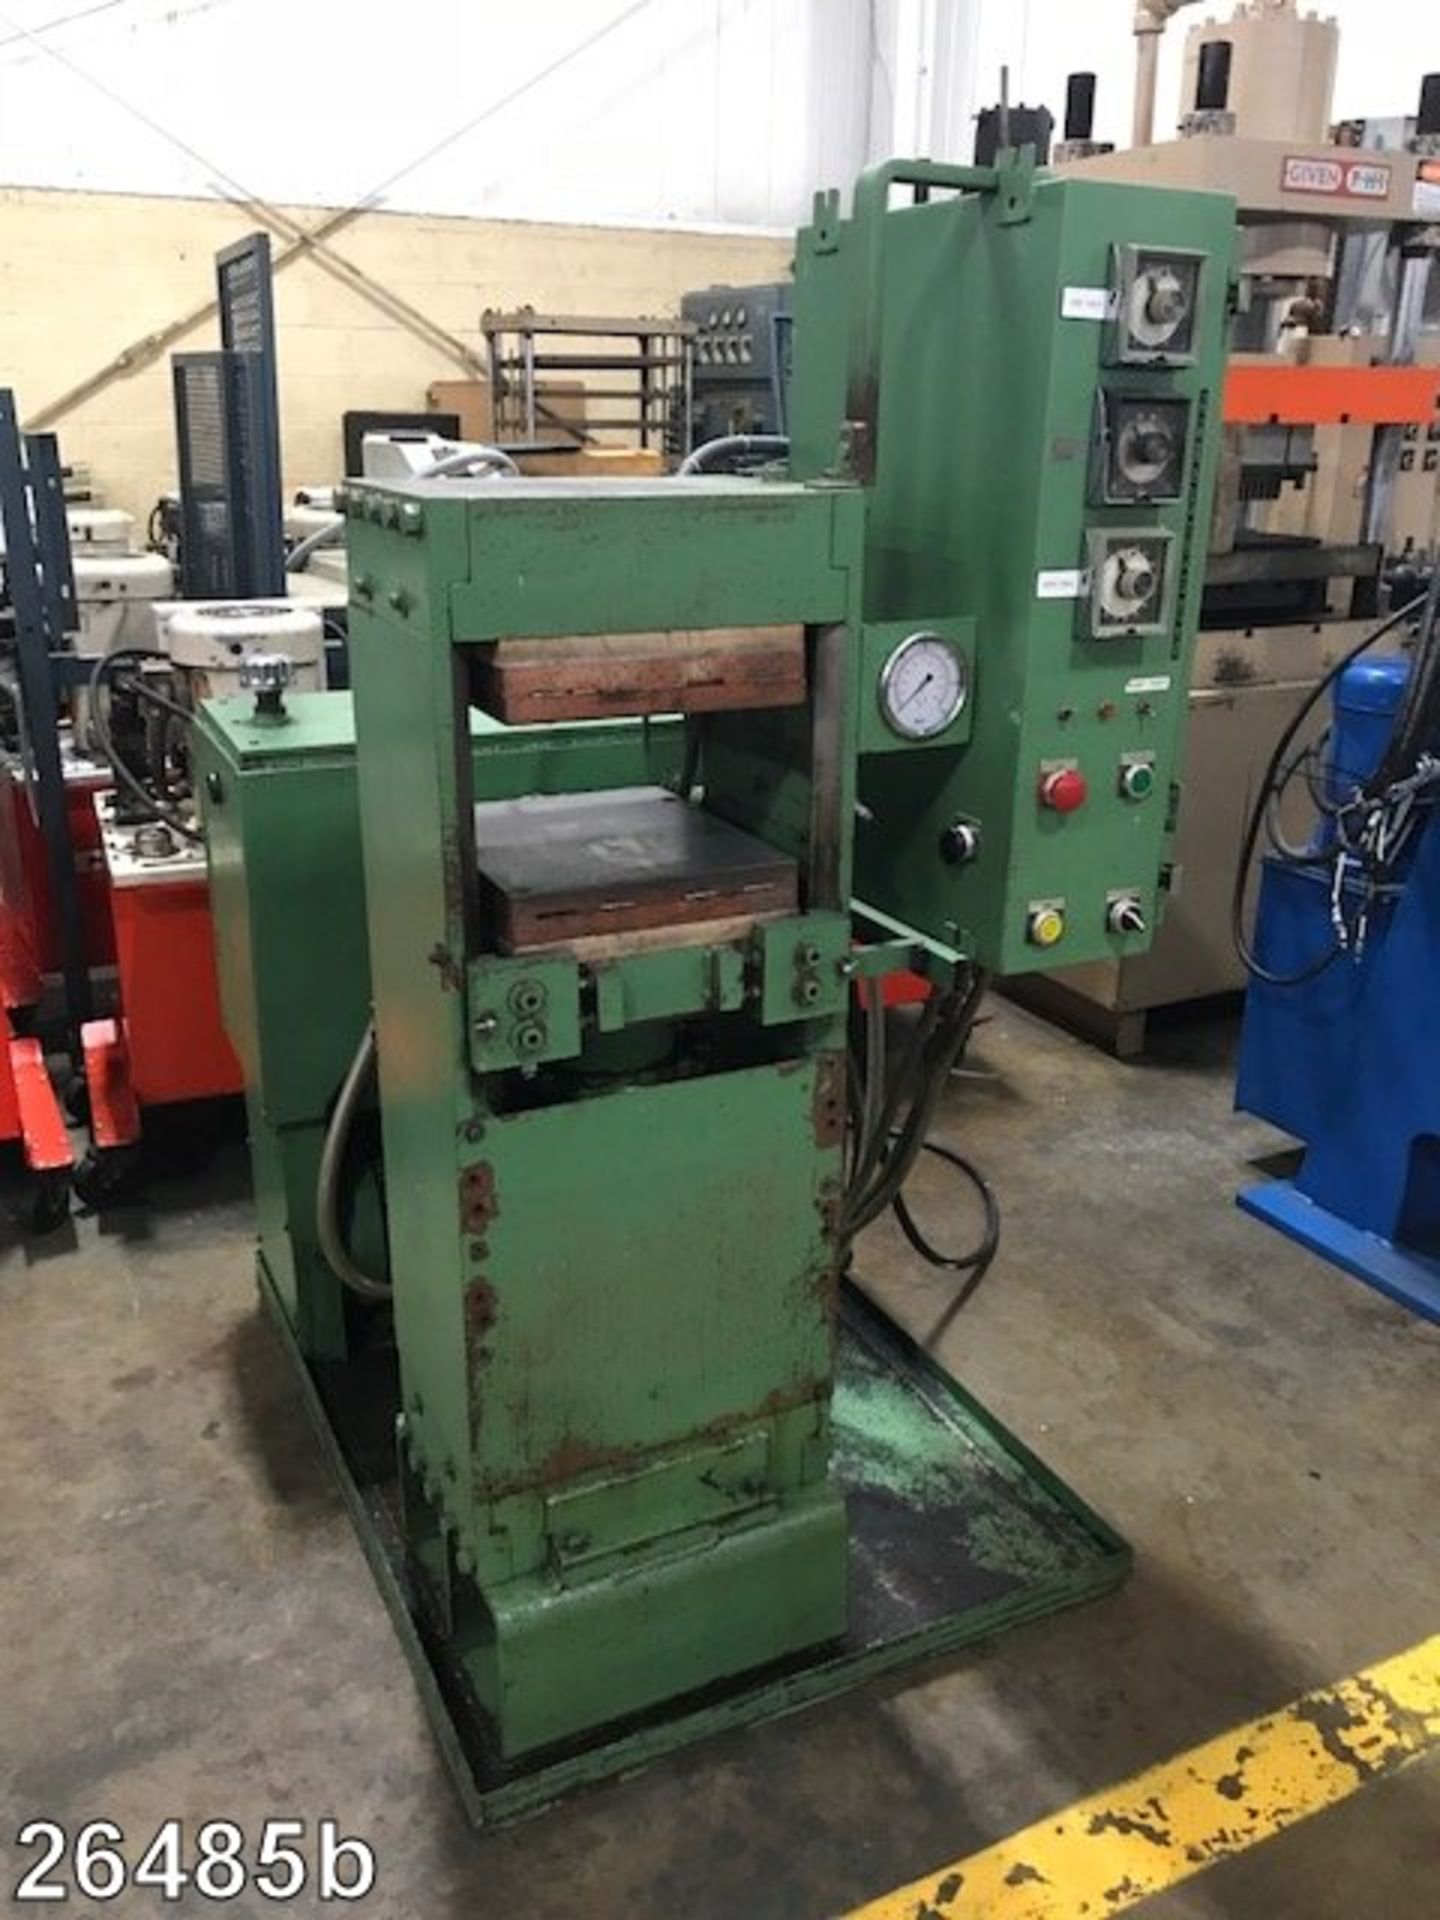 EEMCO 25 TON (APPROX.) MOLDING & LAMINATING PRESS S/N N/A - Image 2 of 2